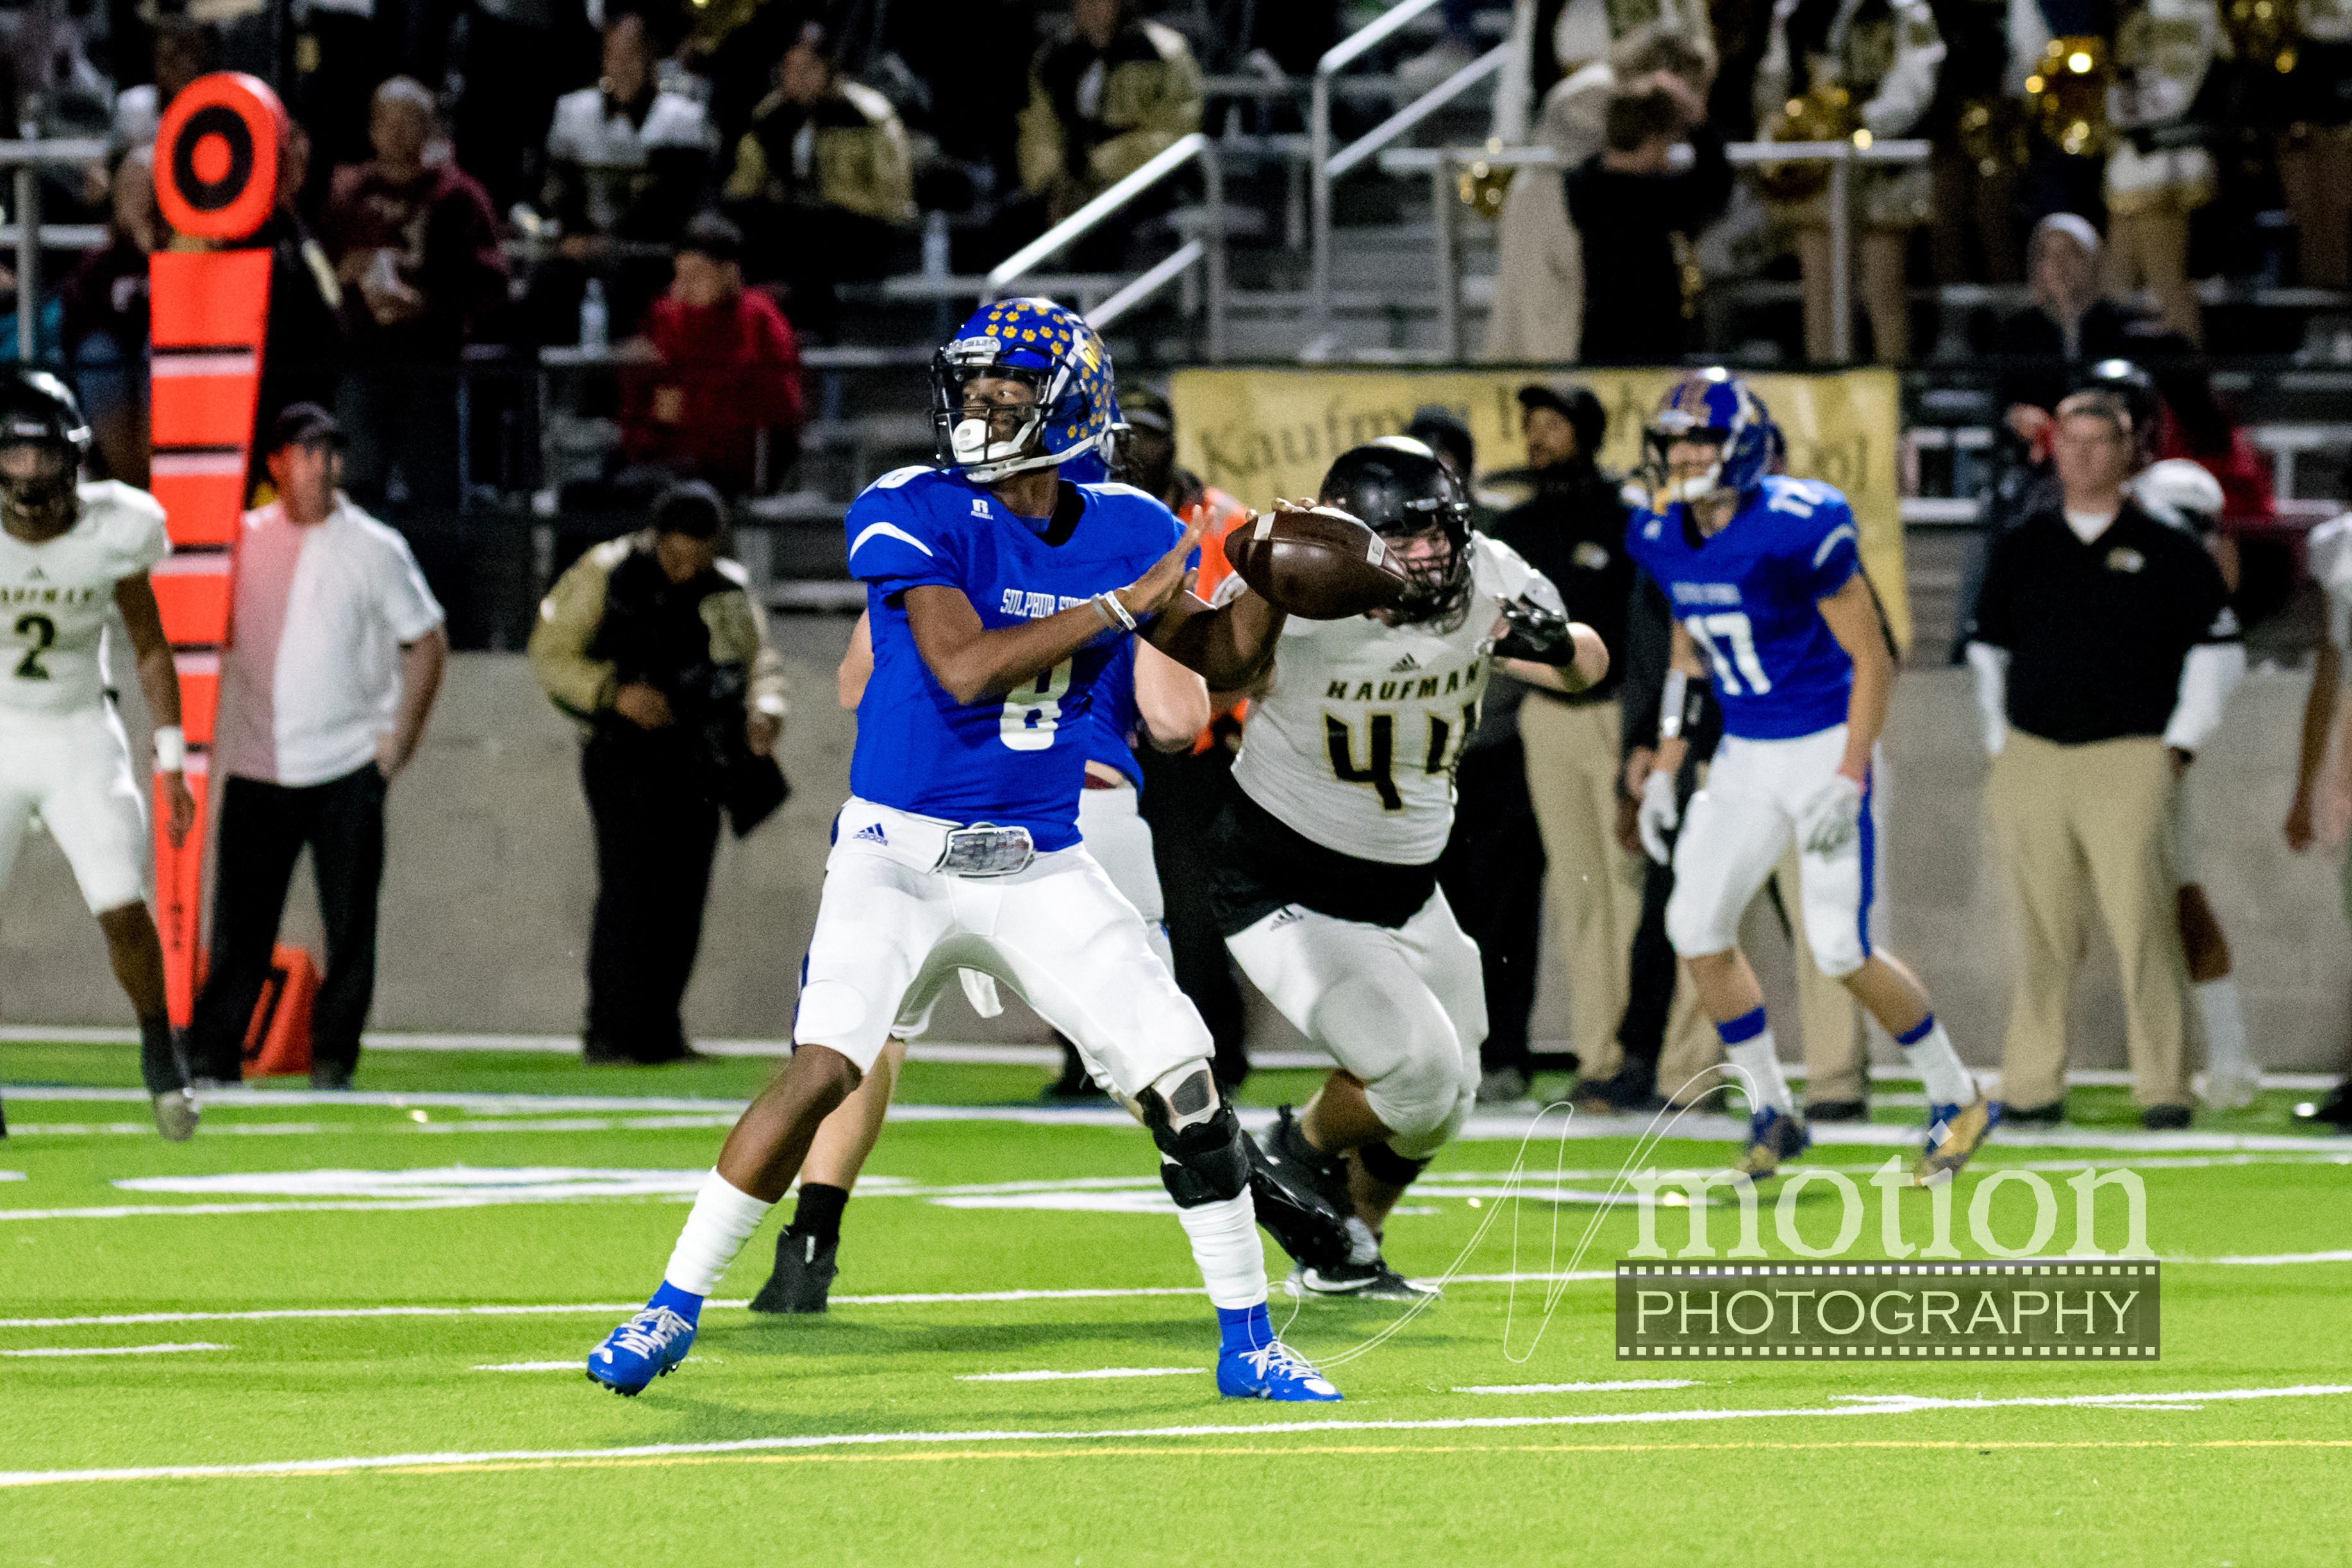 Photos from Sulphur Springs Wildcats Football’s 31-21 to Kaufman on Senior Night by Cathy Bryan of Nmotion Photography!